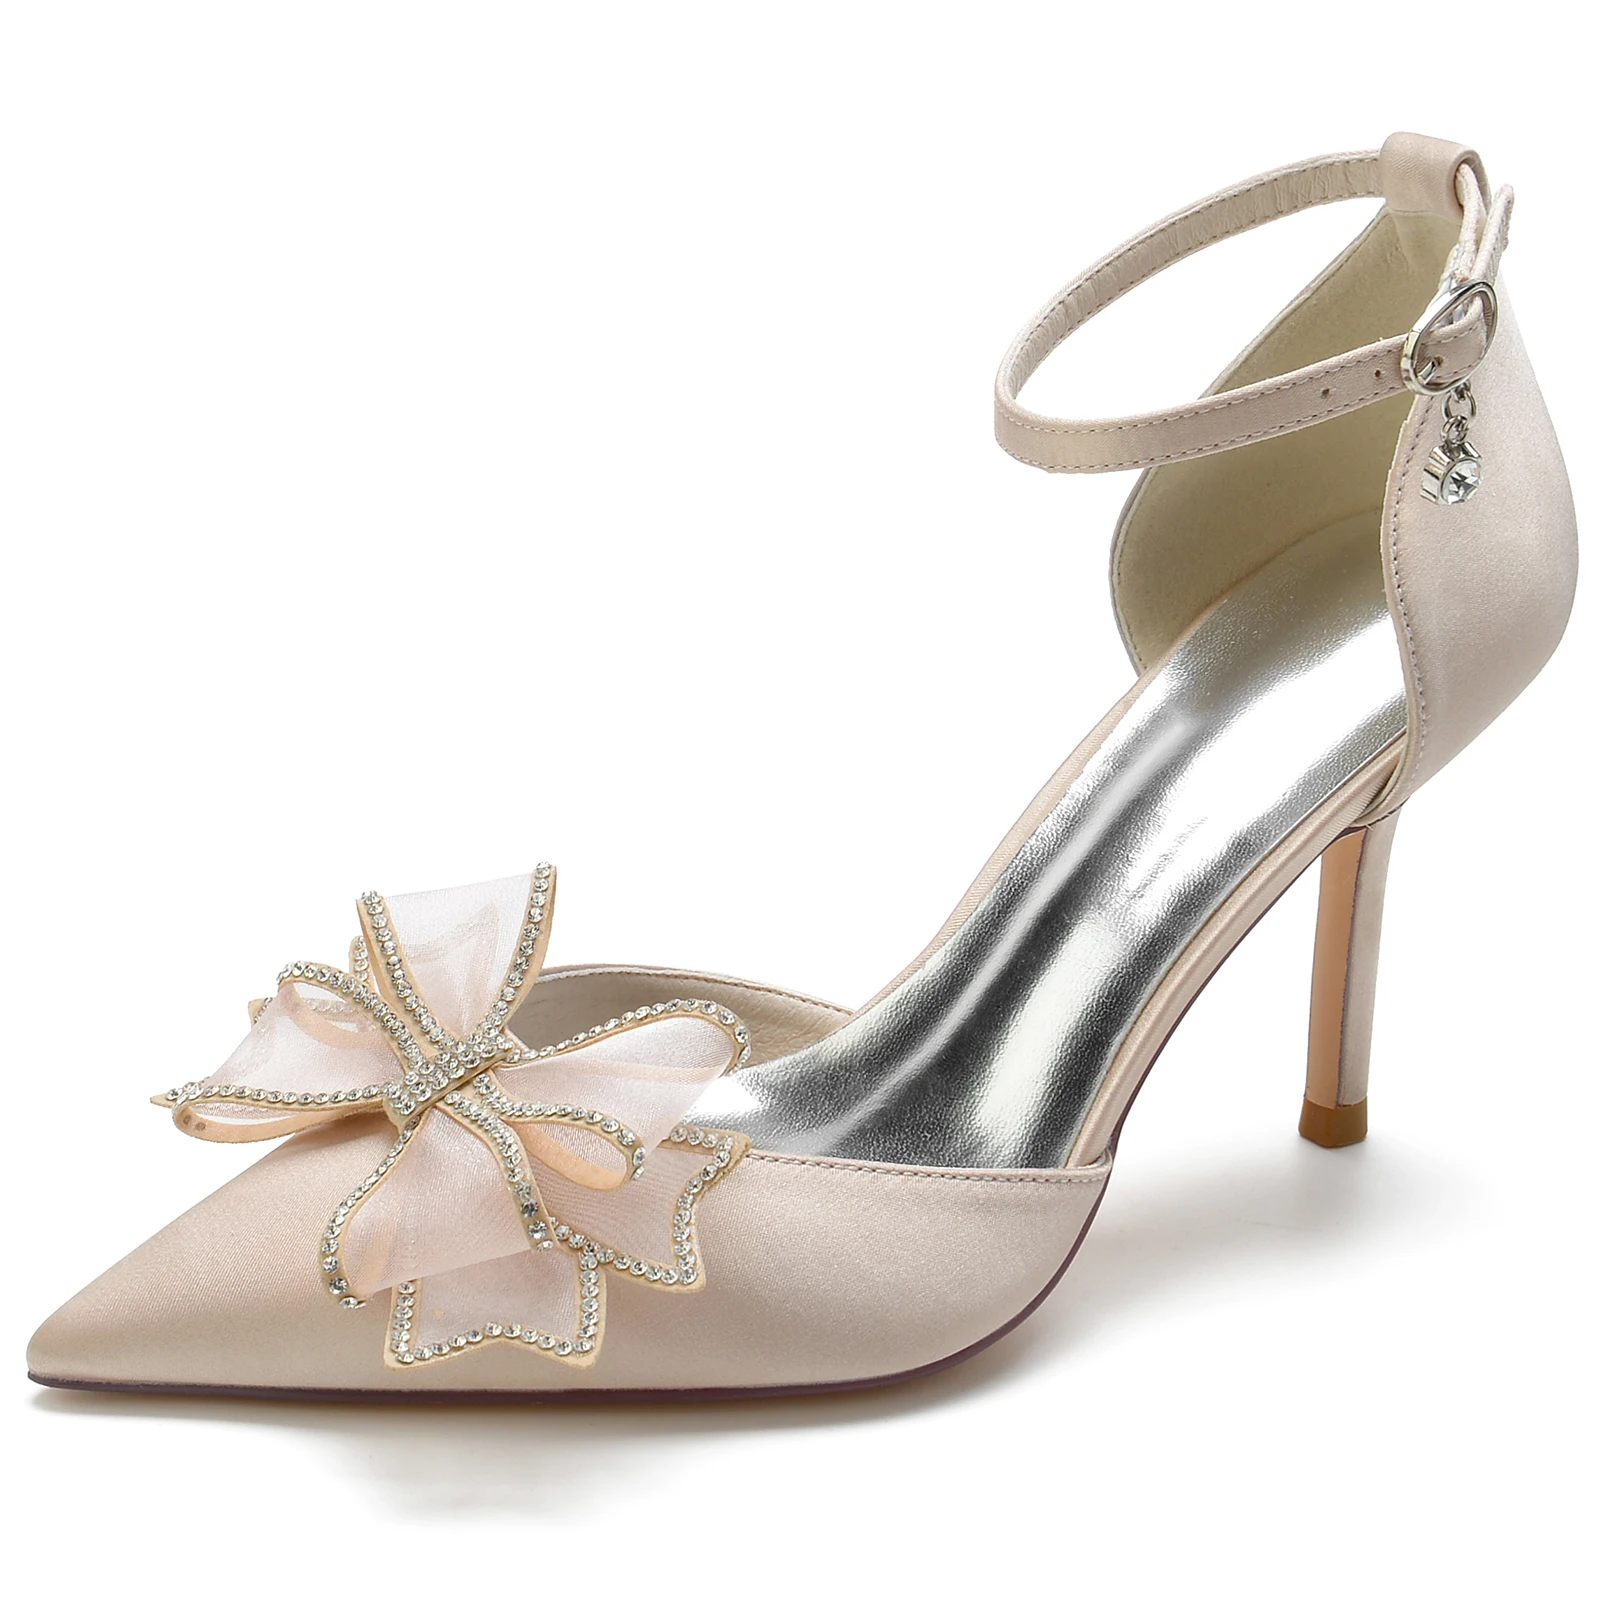 WOMENS IVORY SATIN & LACE VINTAGE BRIDAL WEDDING PROM EVENING LOW HEEL SHOES 